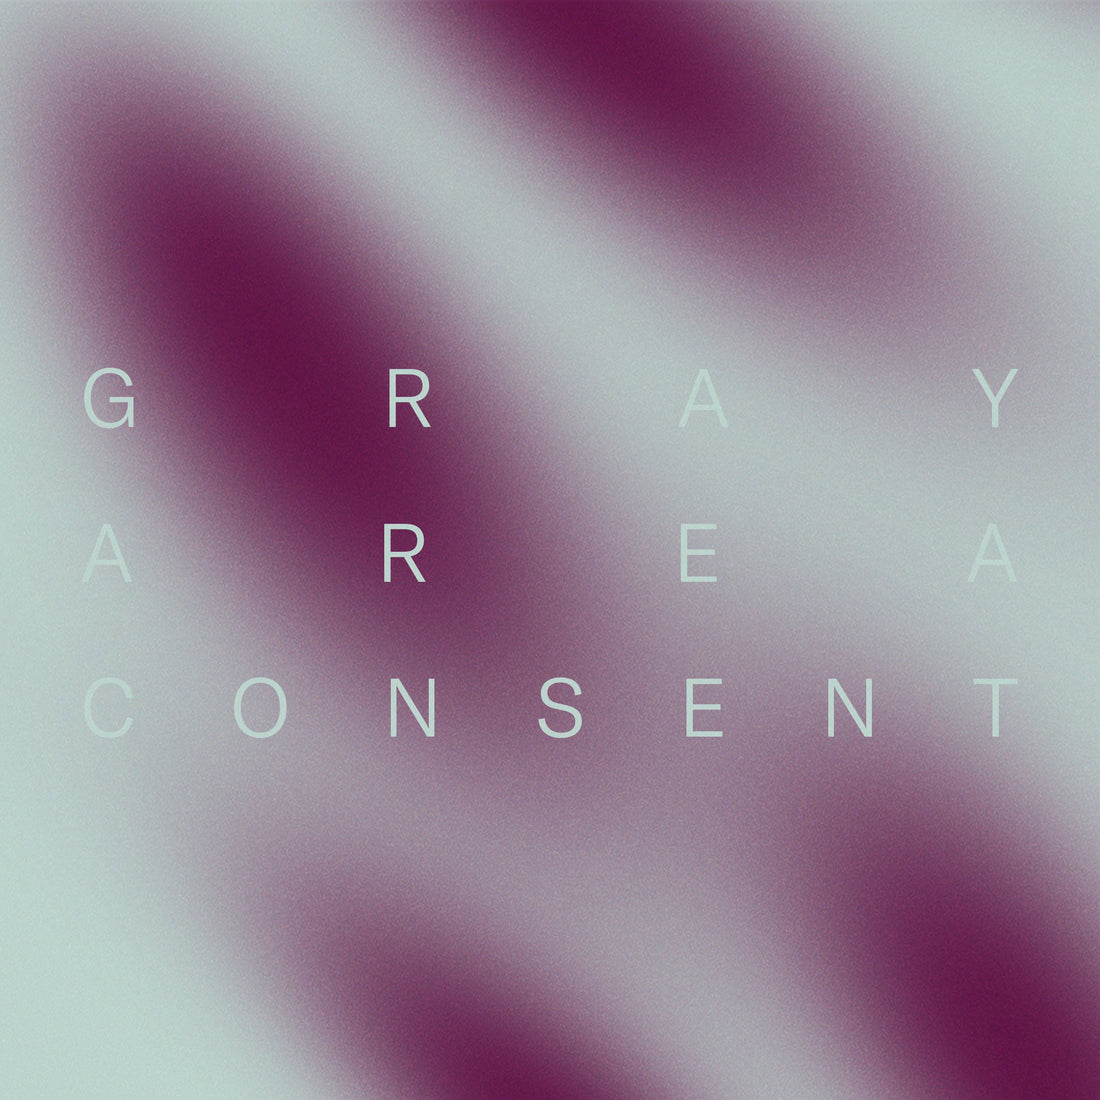 Gray Area Consent: How to Handle Tricky Situations